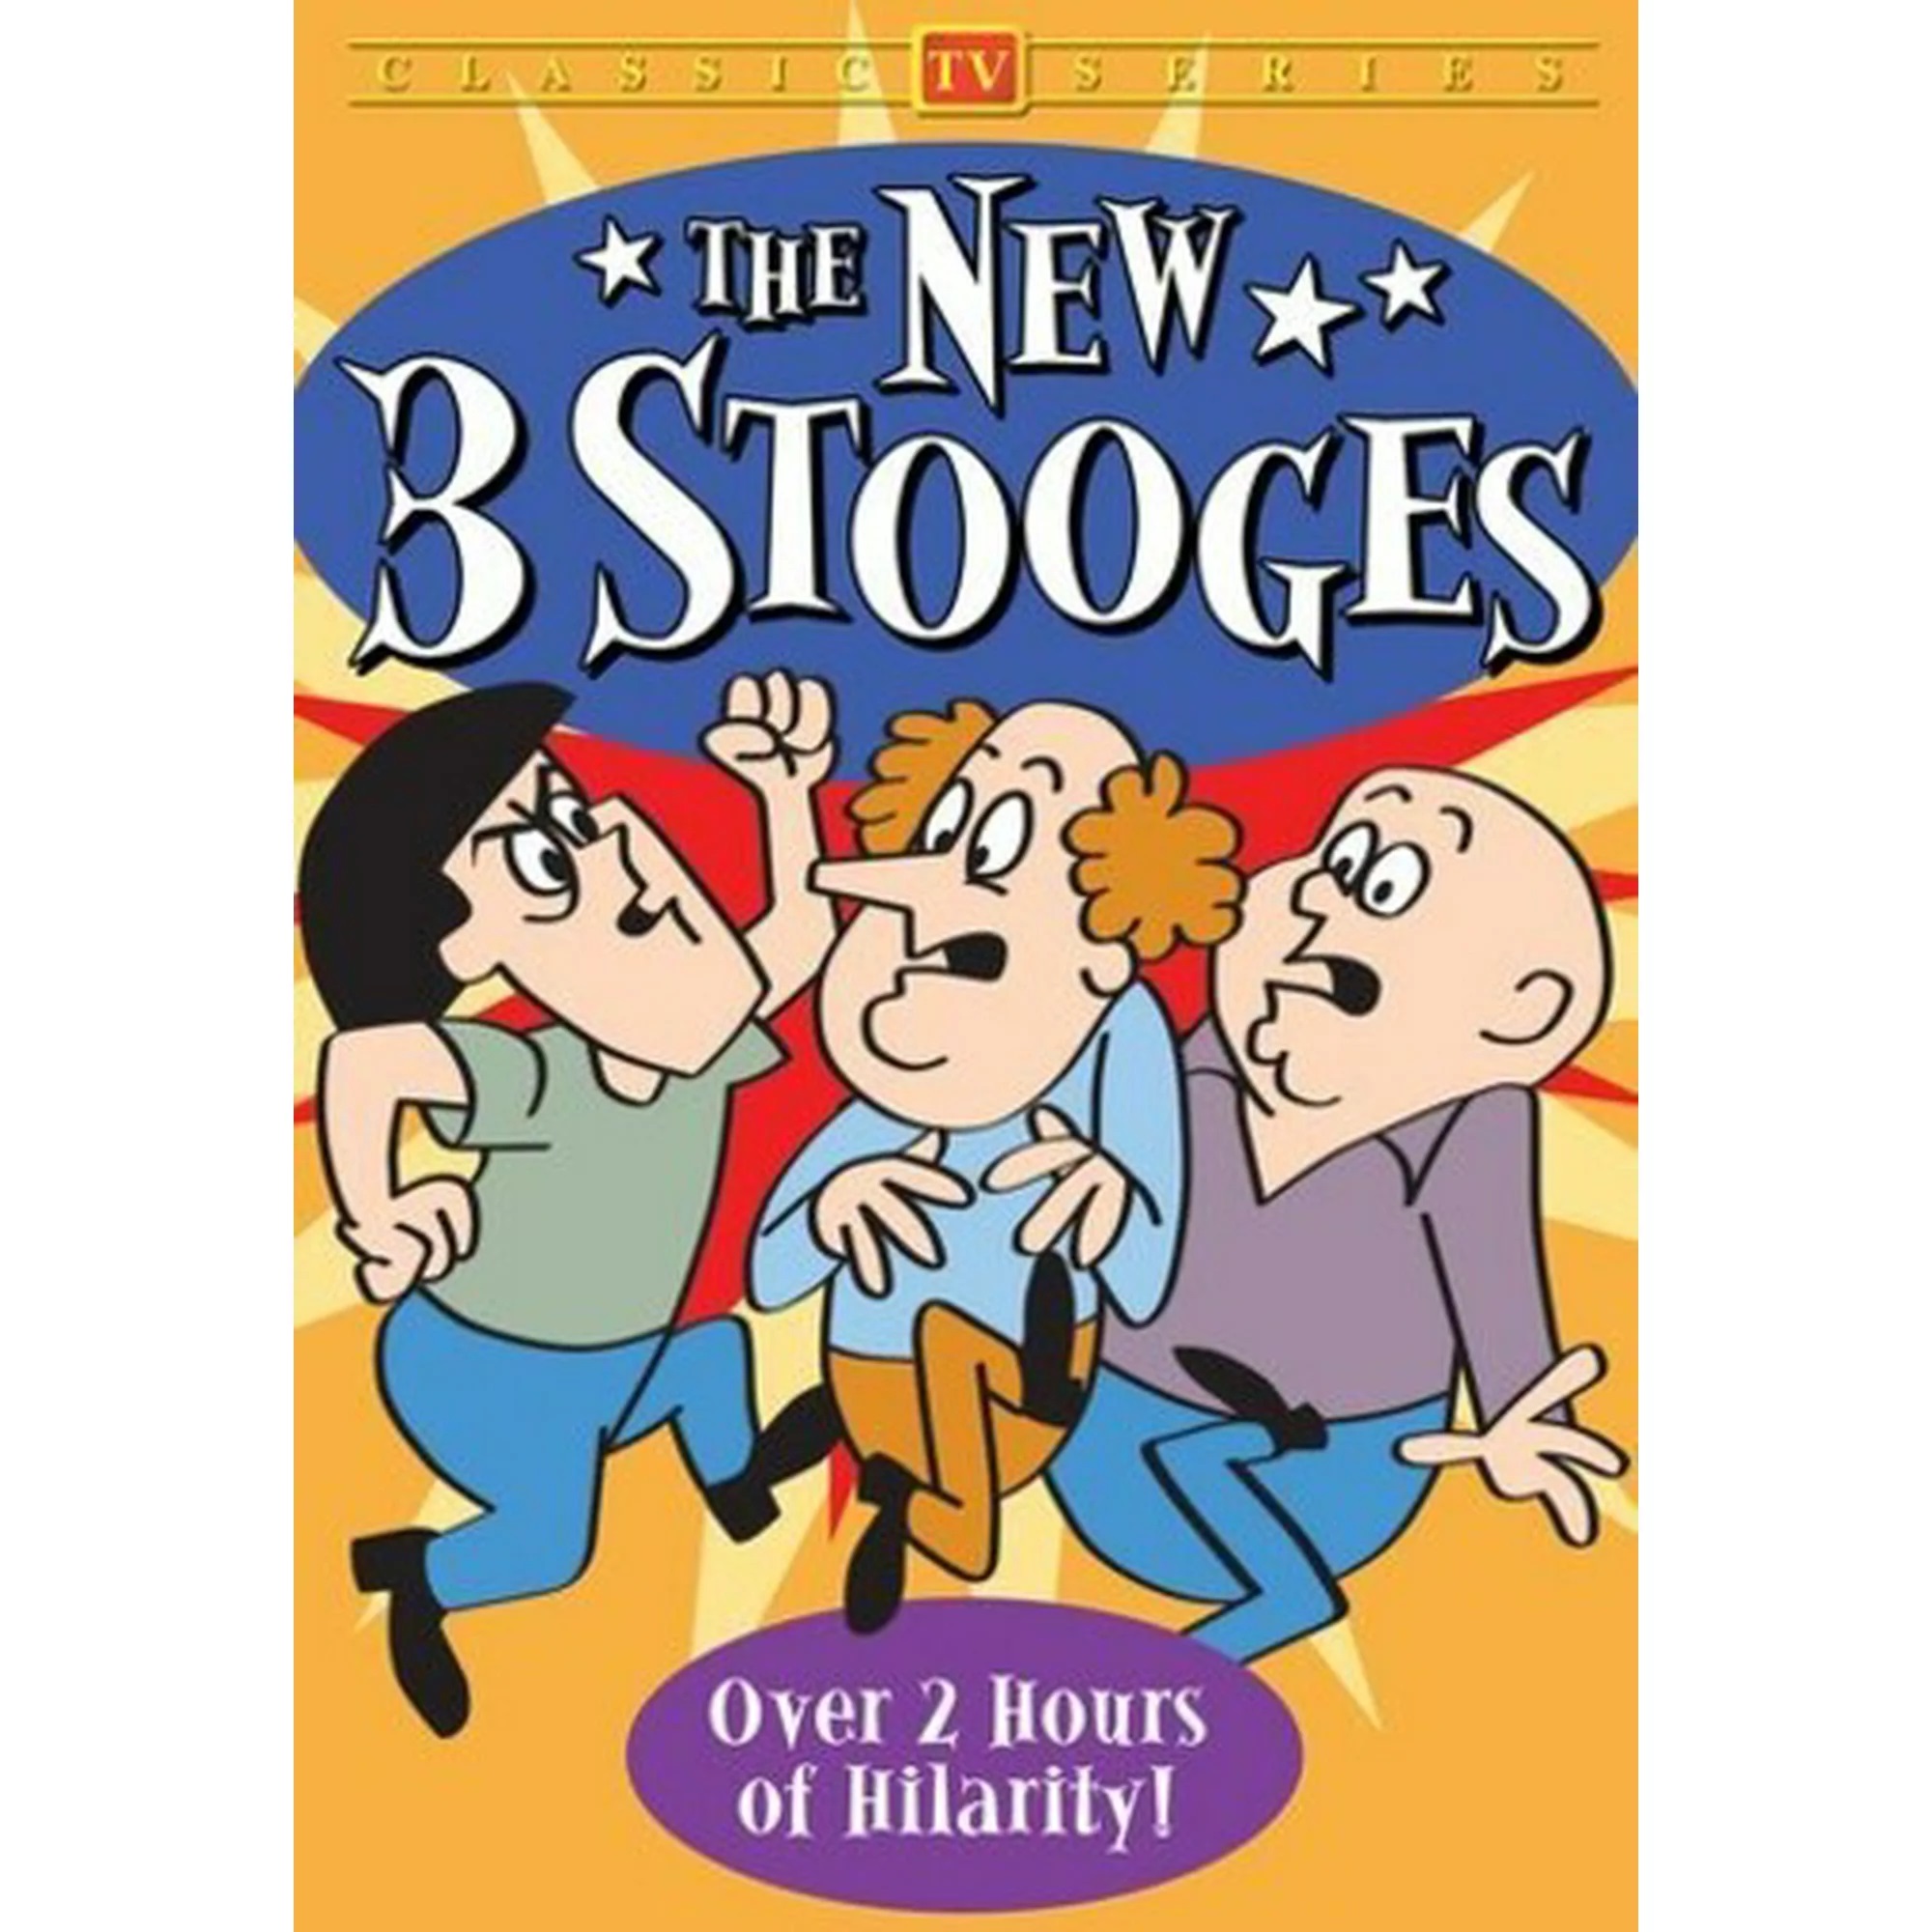 the-new-3-stooges-1965